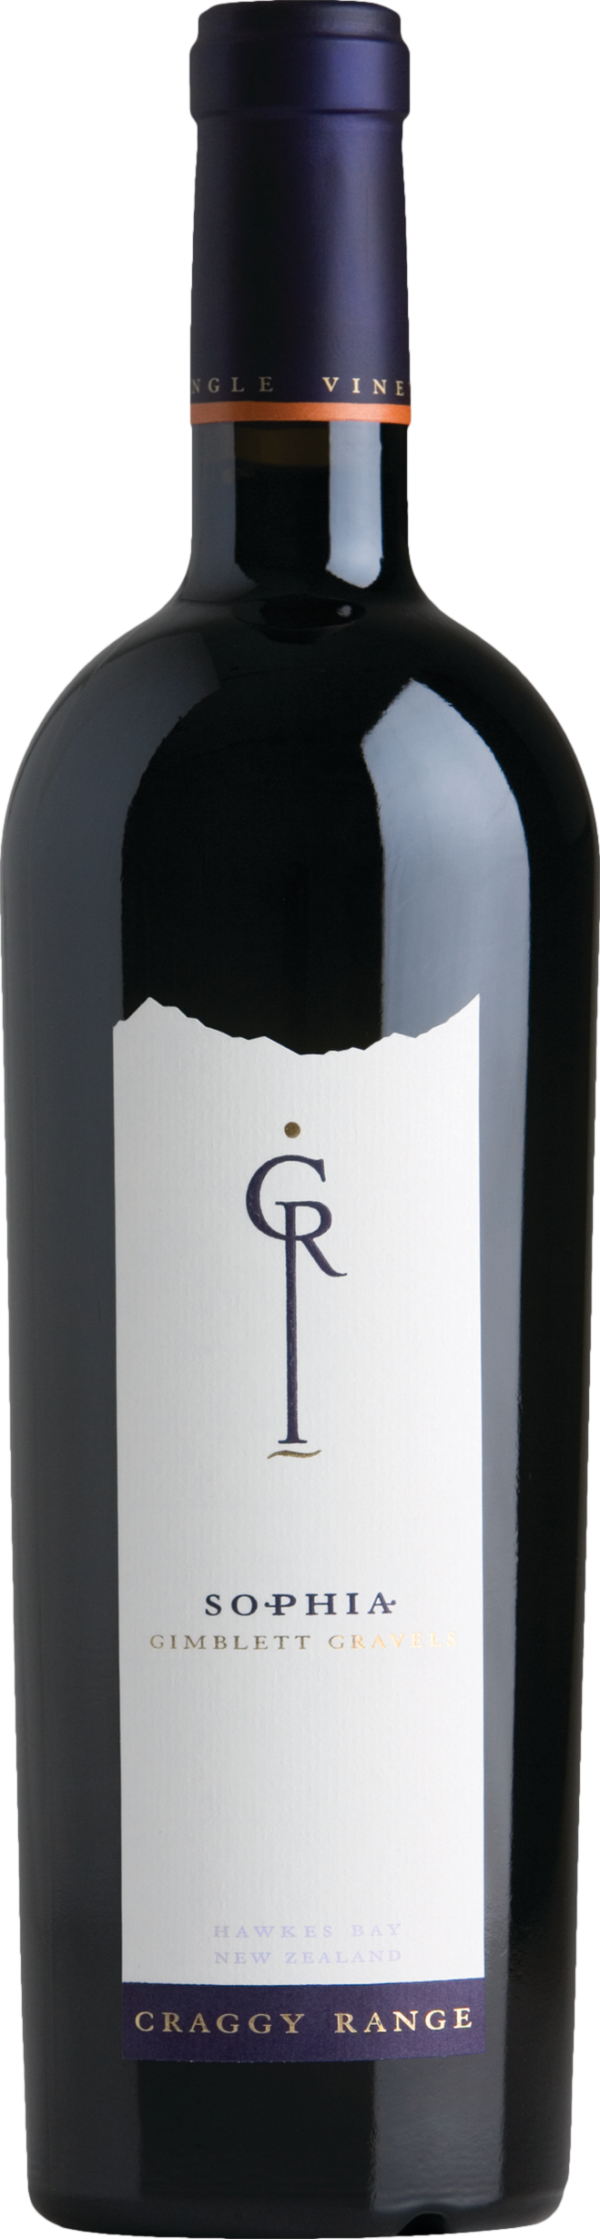 Product image of Craggy Range Sophia 2016 from 8wines